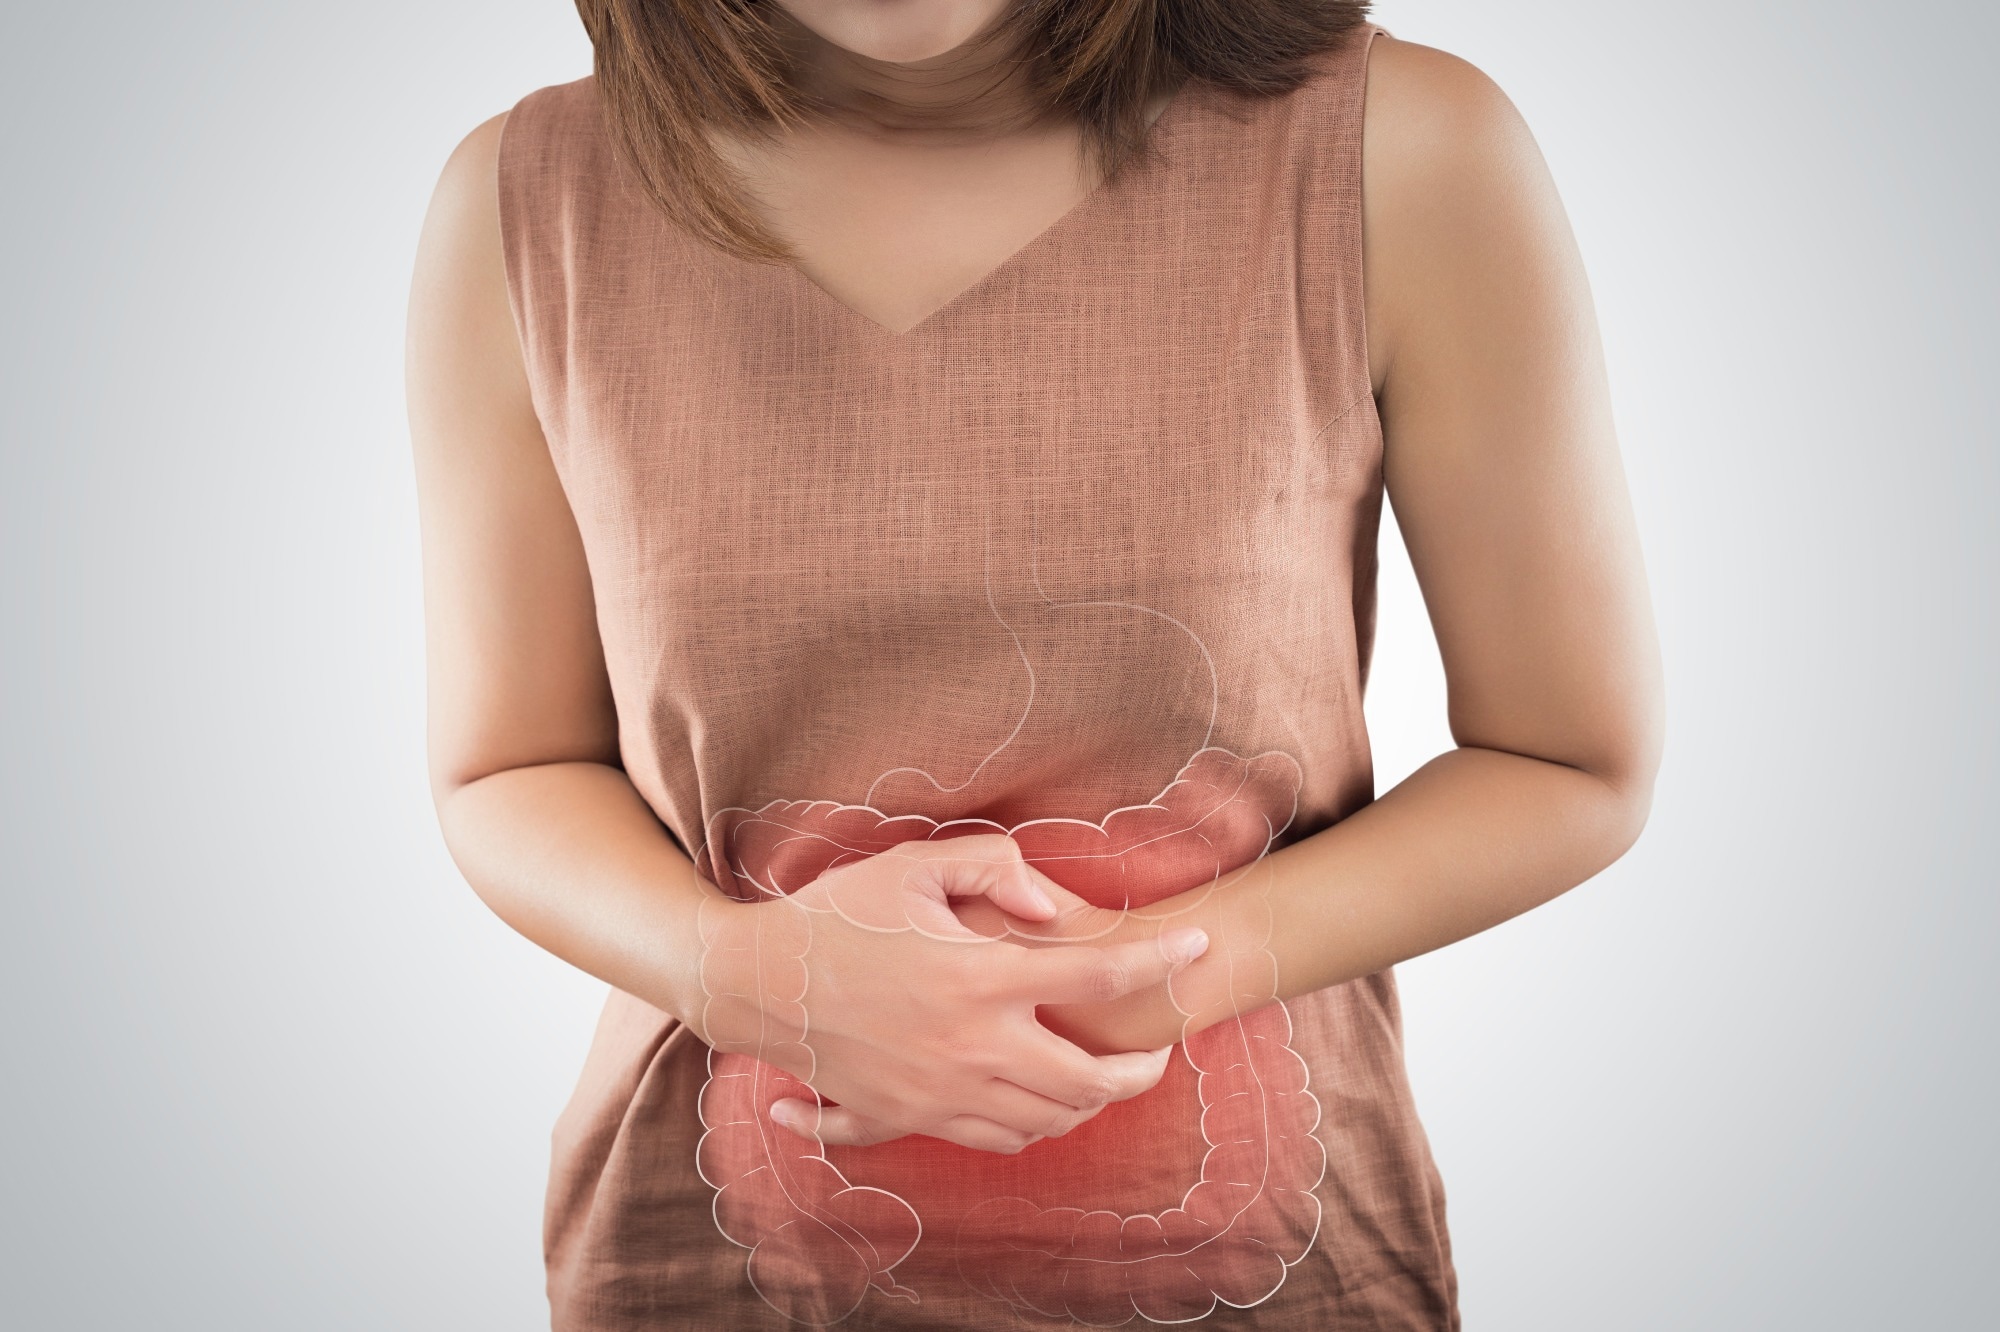 Study: Randomized Placebo-Controlled Phase 3 Trial of Vibrating Capsule for Chronic Constipation. Image Credit: Emily frost/Shutterstock